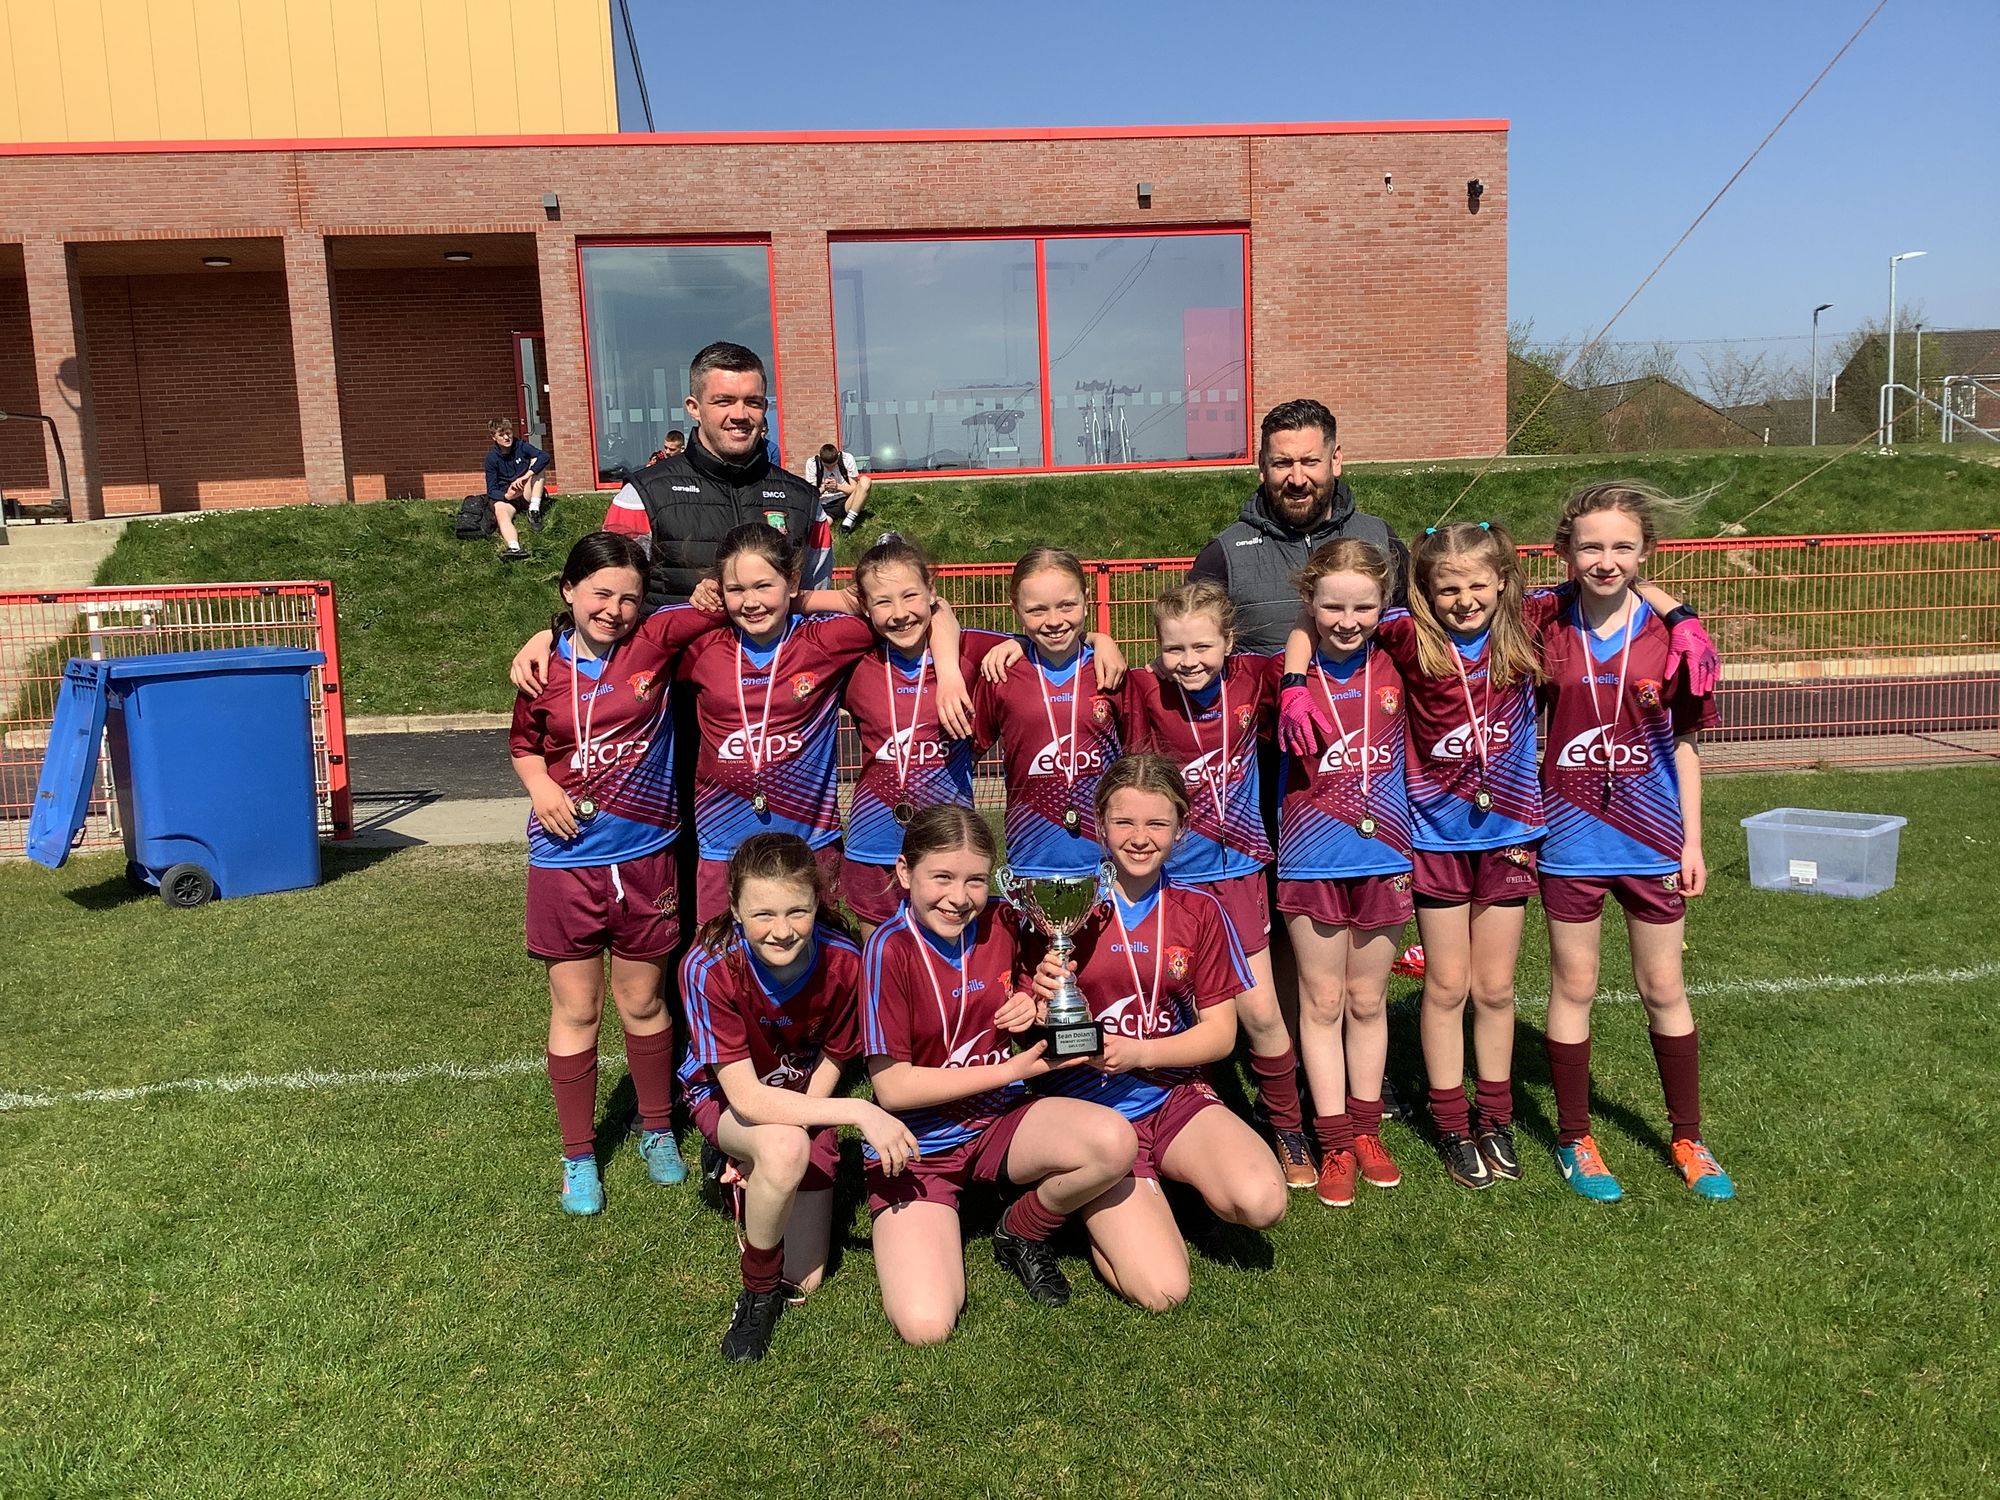 Congratulations to our Girls’ Gaelic Team on winning the Seán Dolans Girls School Cup!